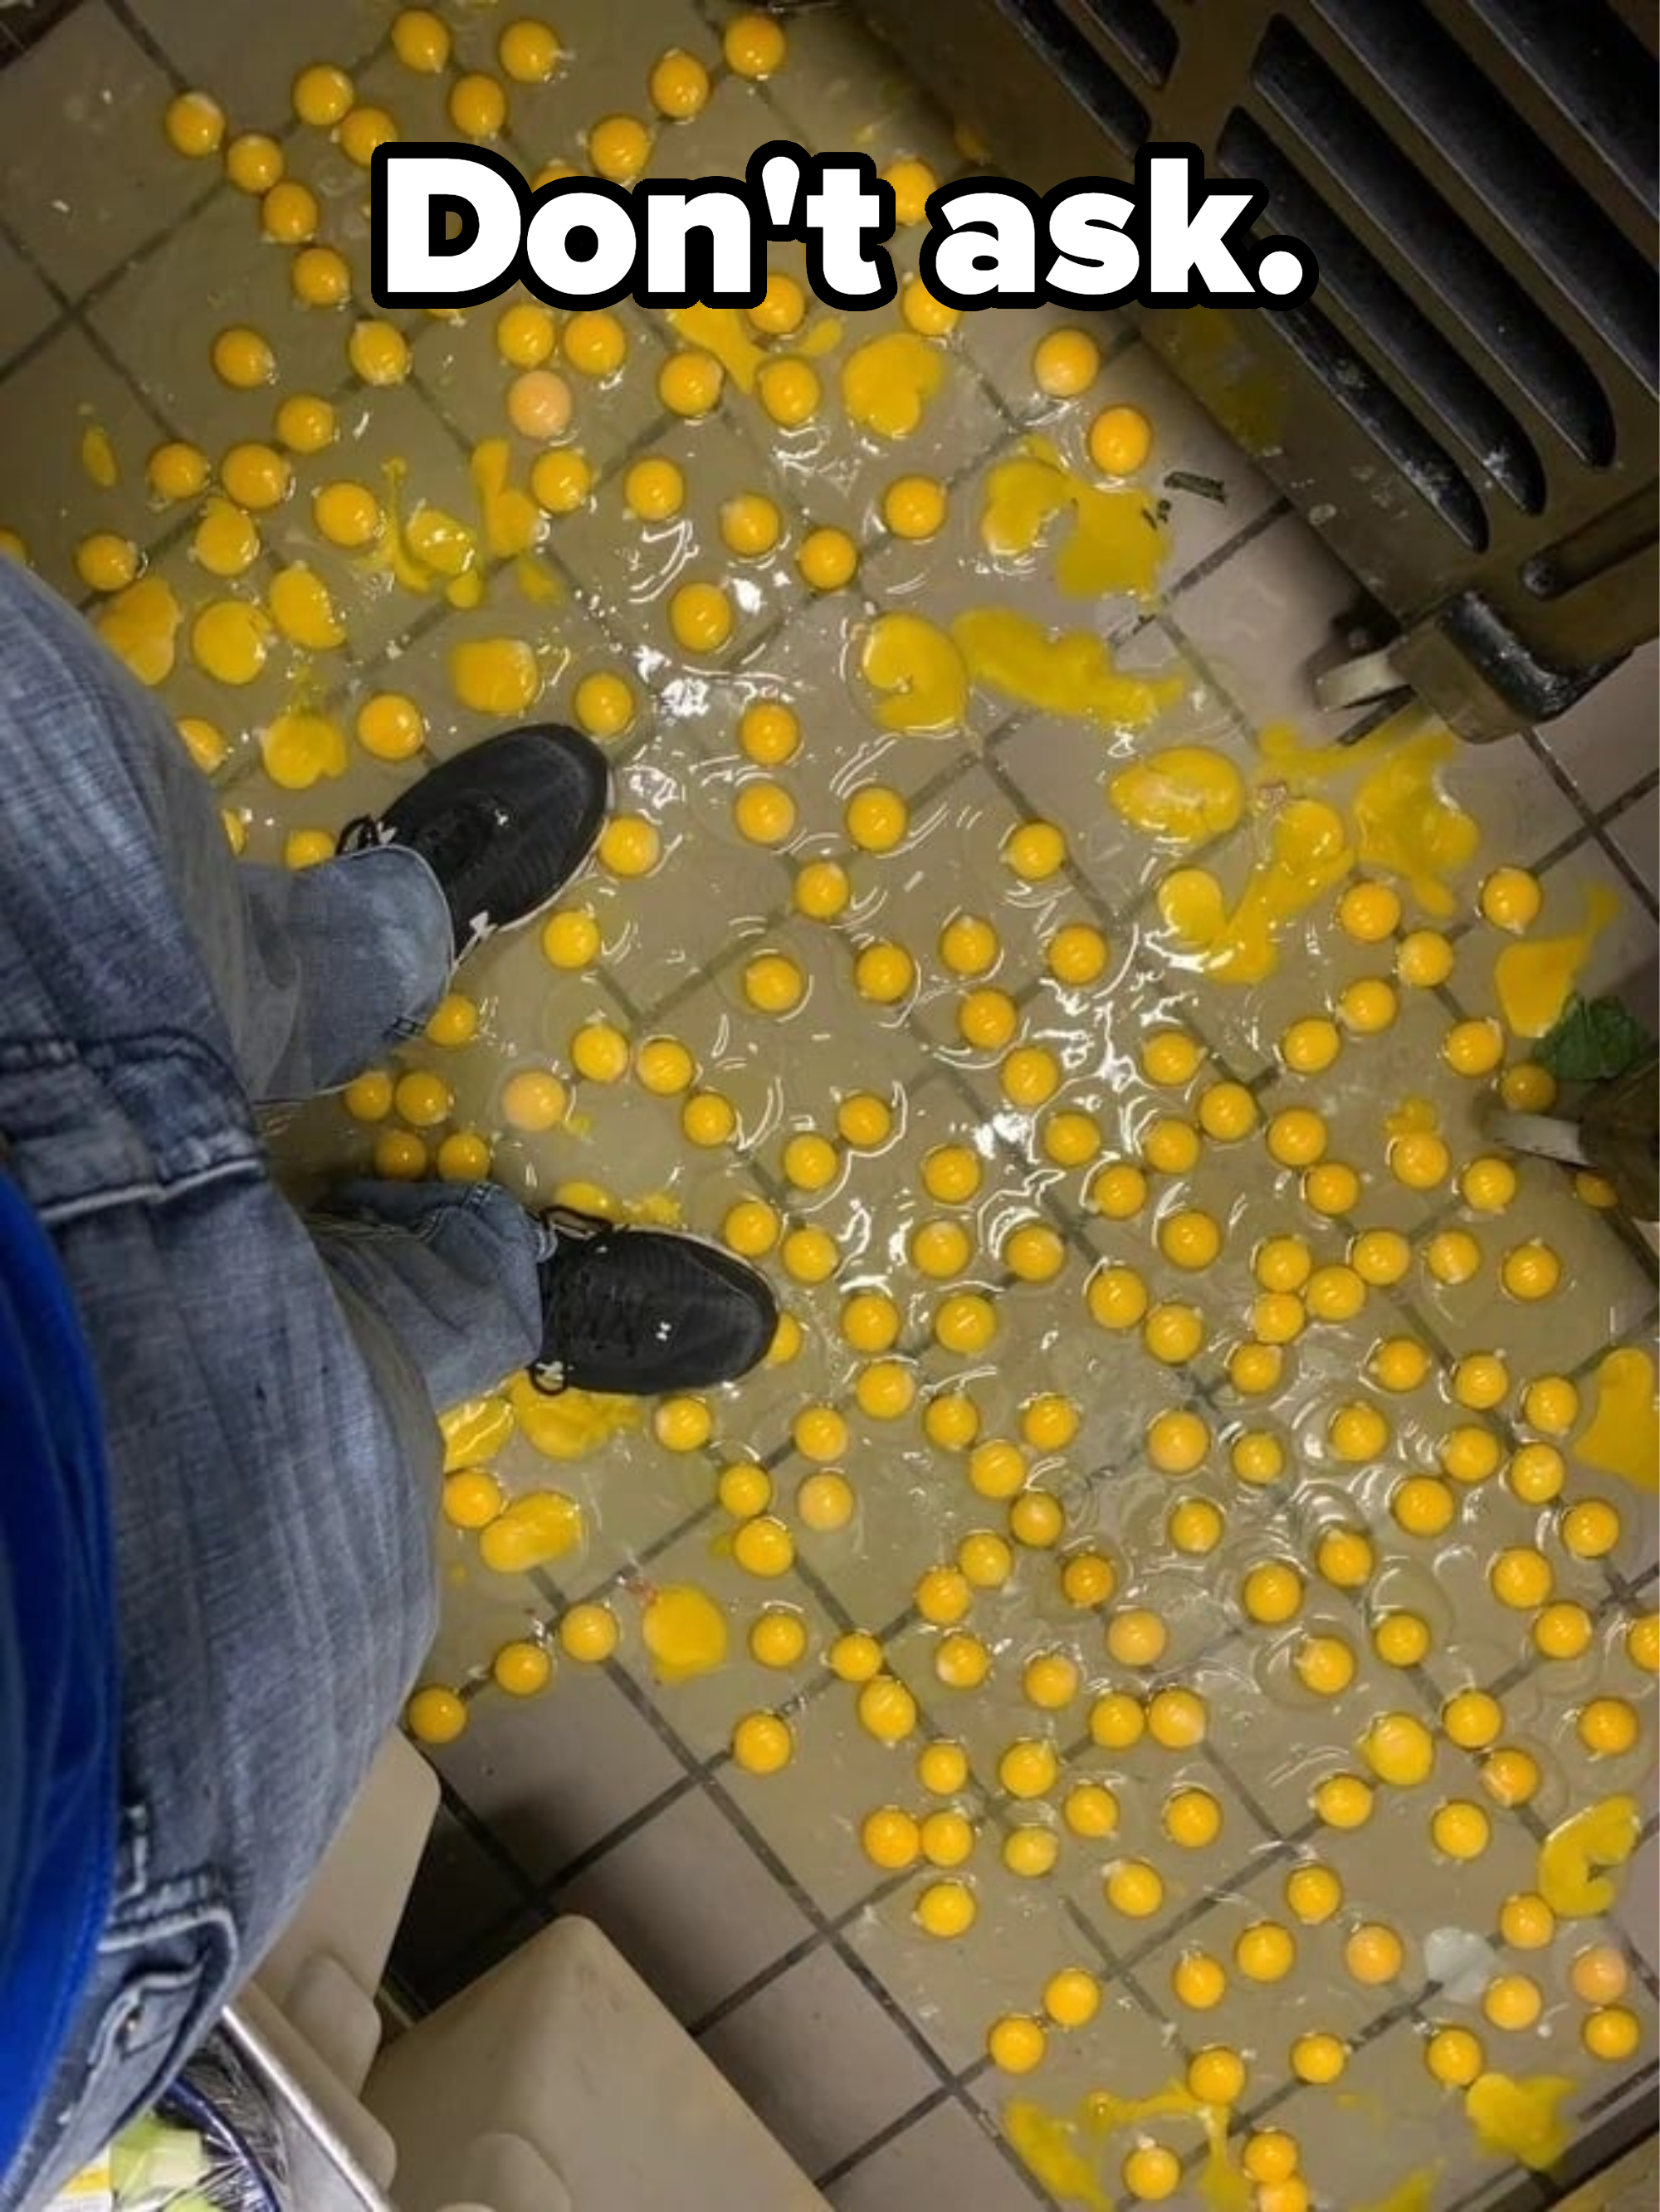 &quot;Don&#x27;t ask&quot; caption, with scores of egg yolks scattered on a kitchen floor